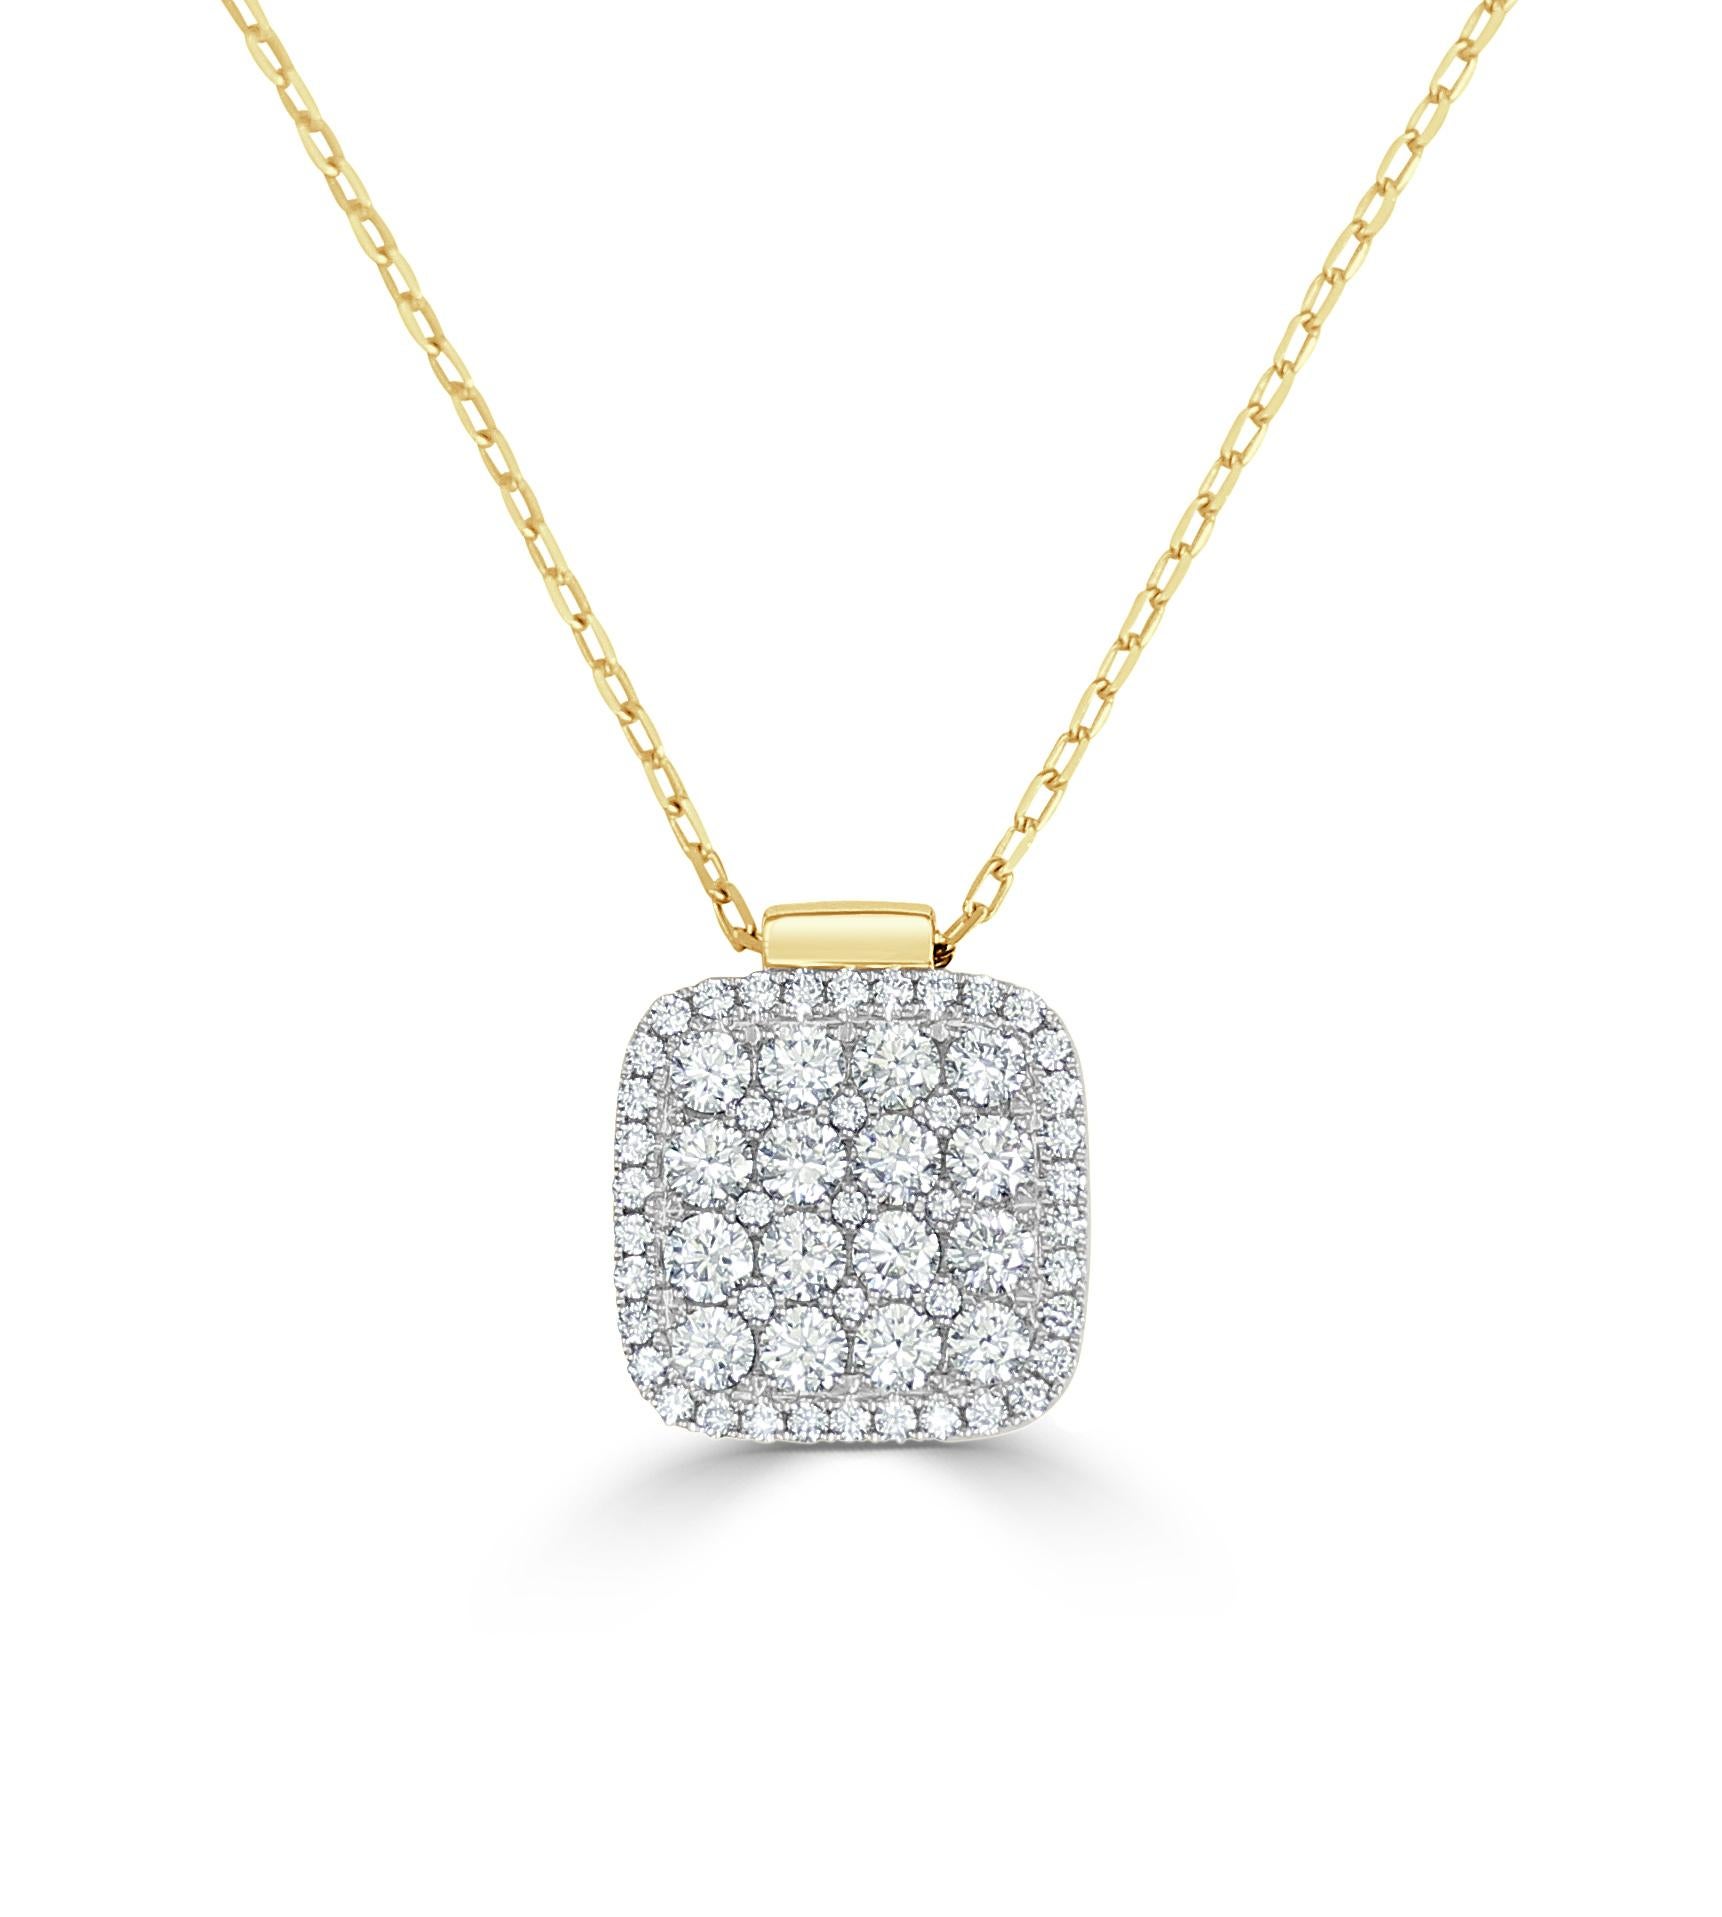 Women's Large “Firenze II” Diamond Pendant with Chain For Sale